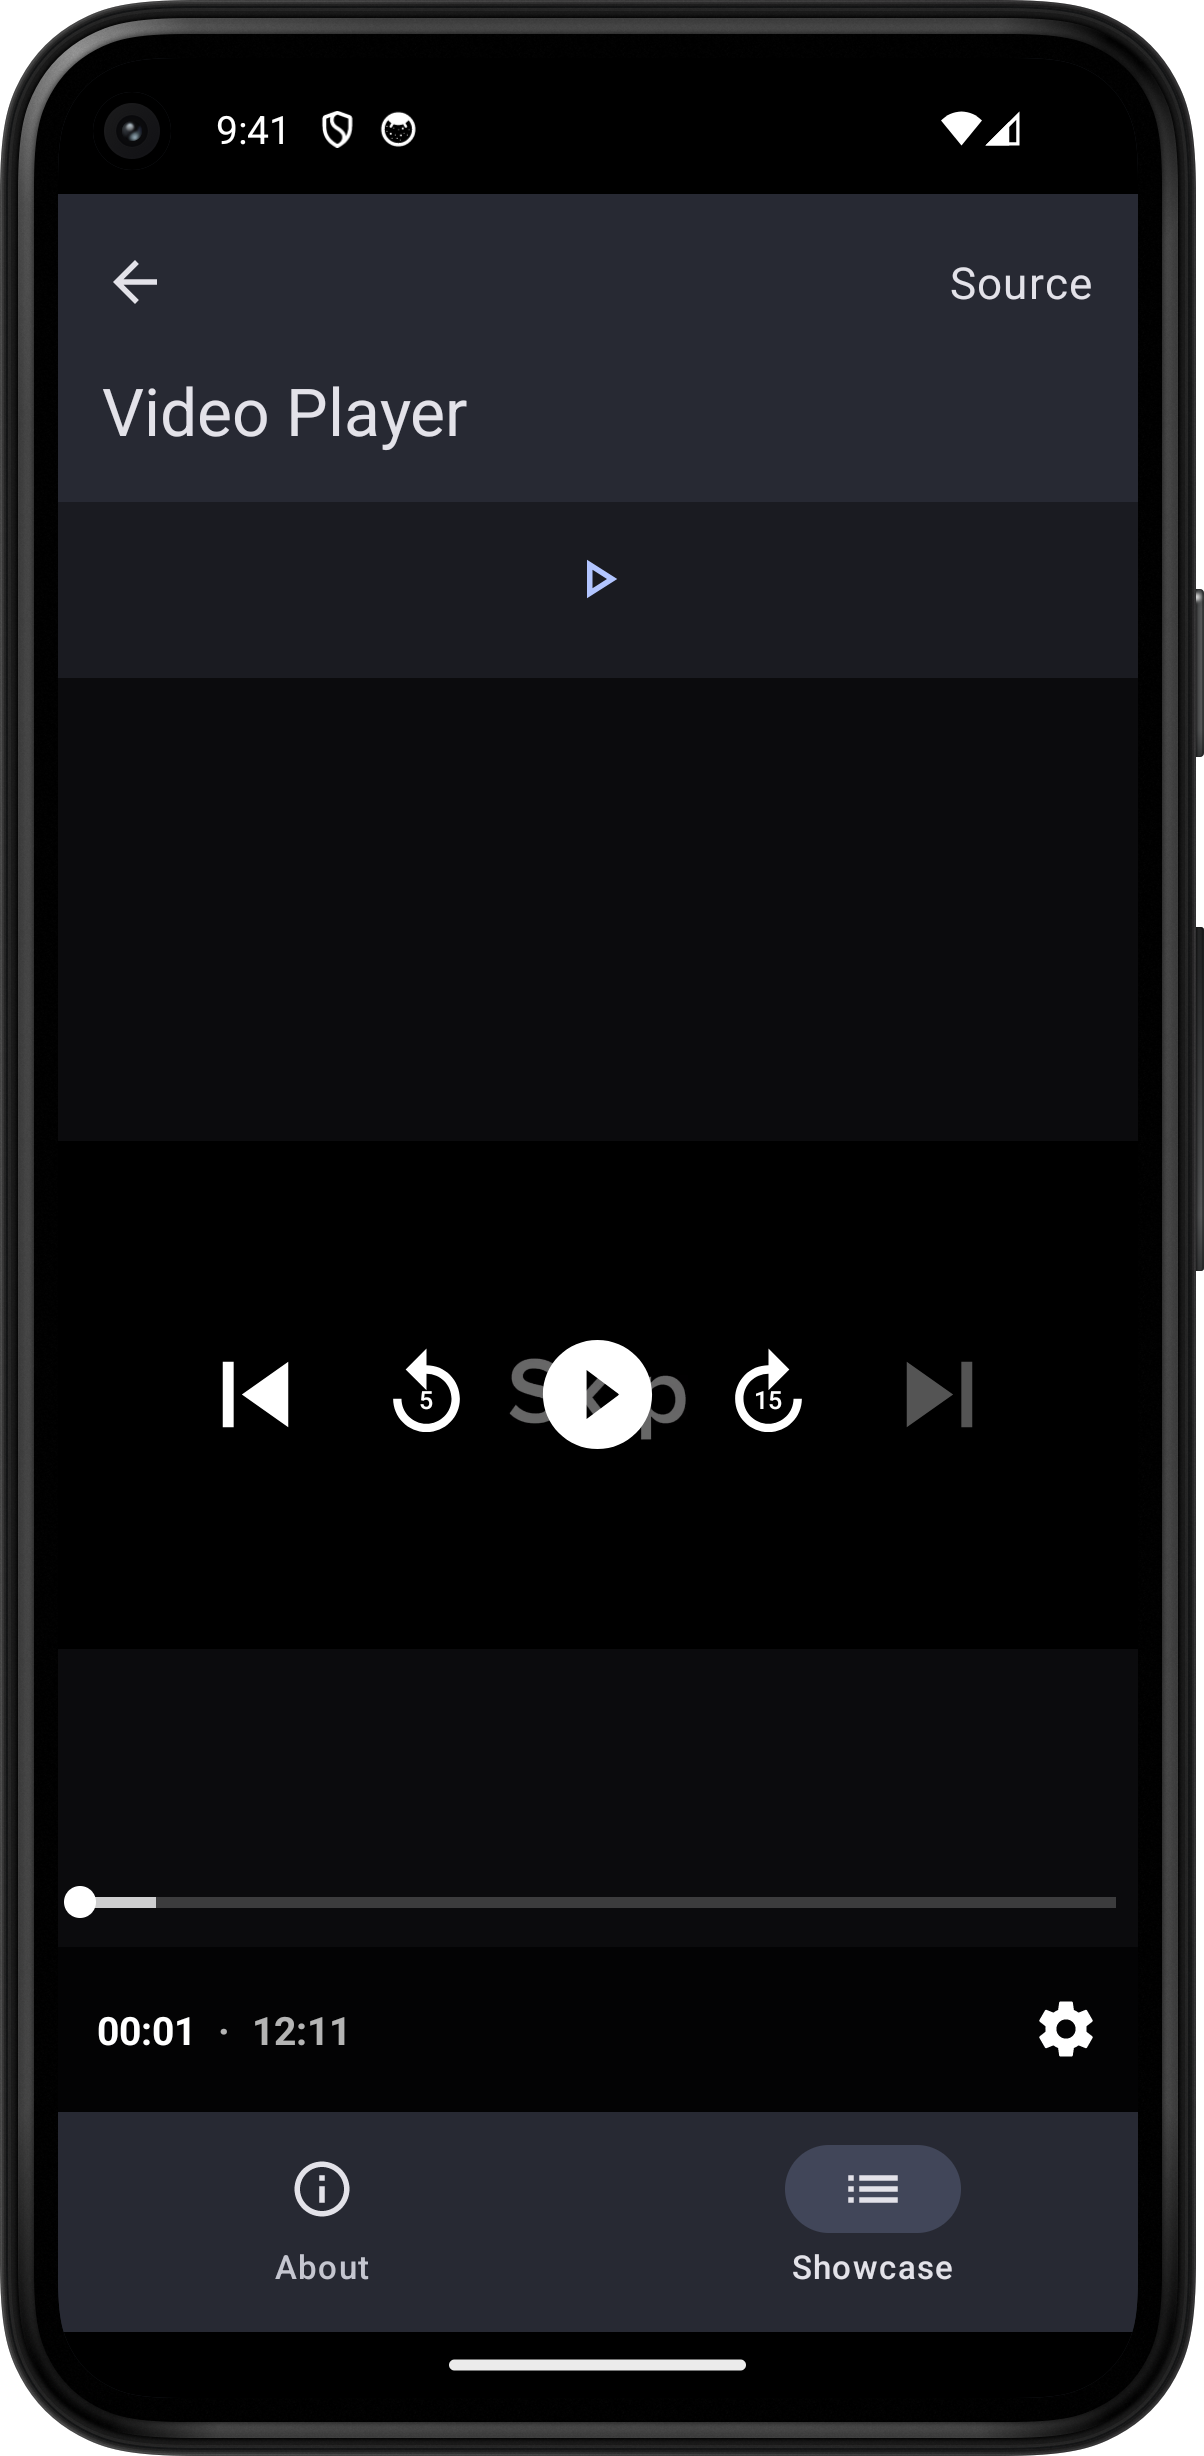 Android screenshot for VideoPlayer component (dark mode)